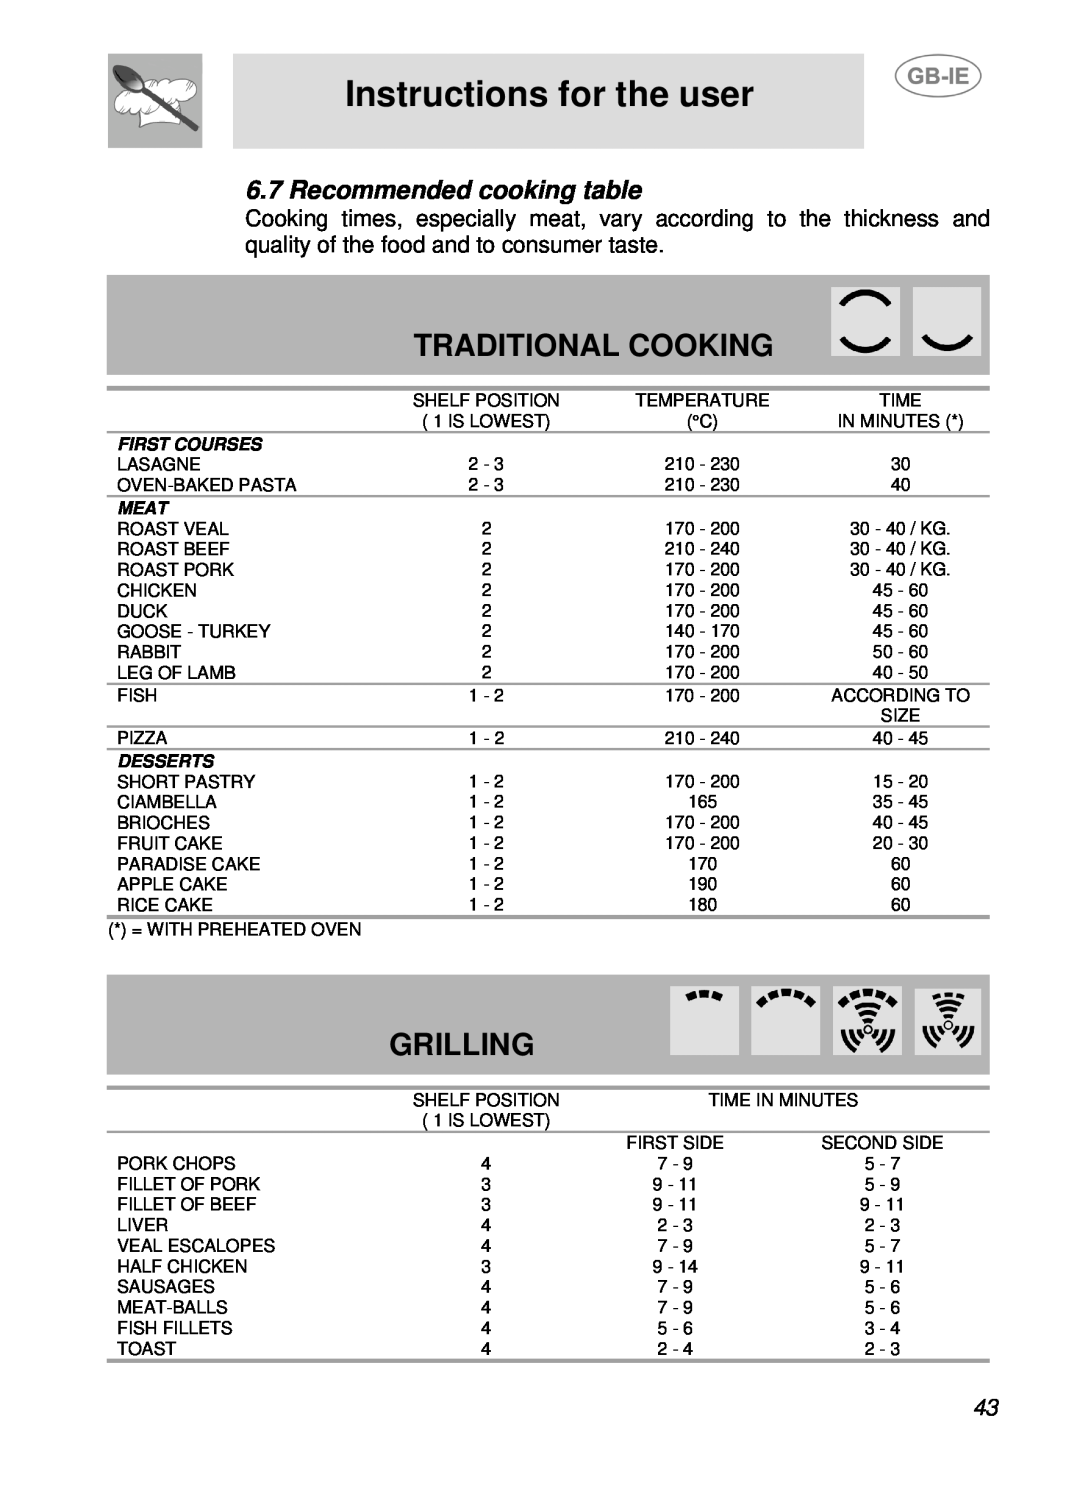 Smeg SE598X manual Traditional Cooking, Grilling, Recommended cooking table, Instructions for the user, First Courses, Meat 